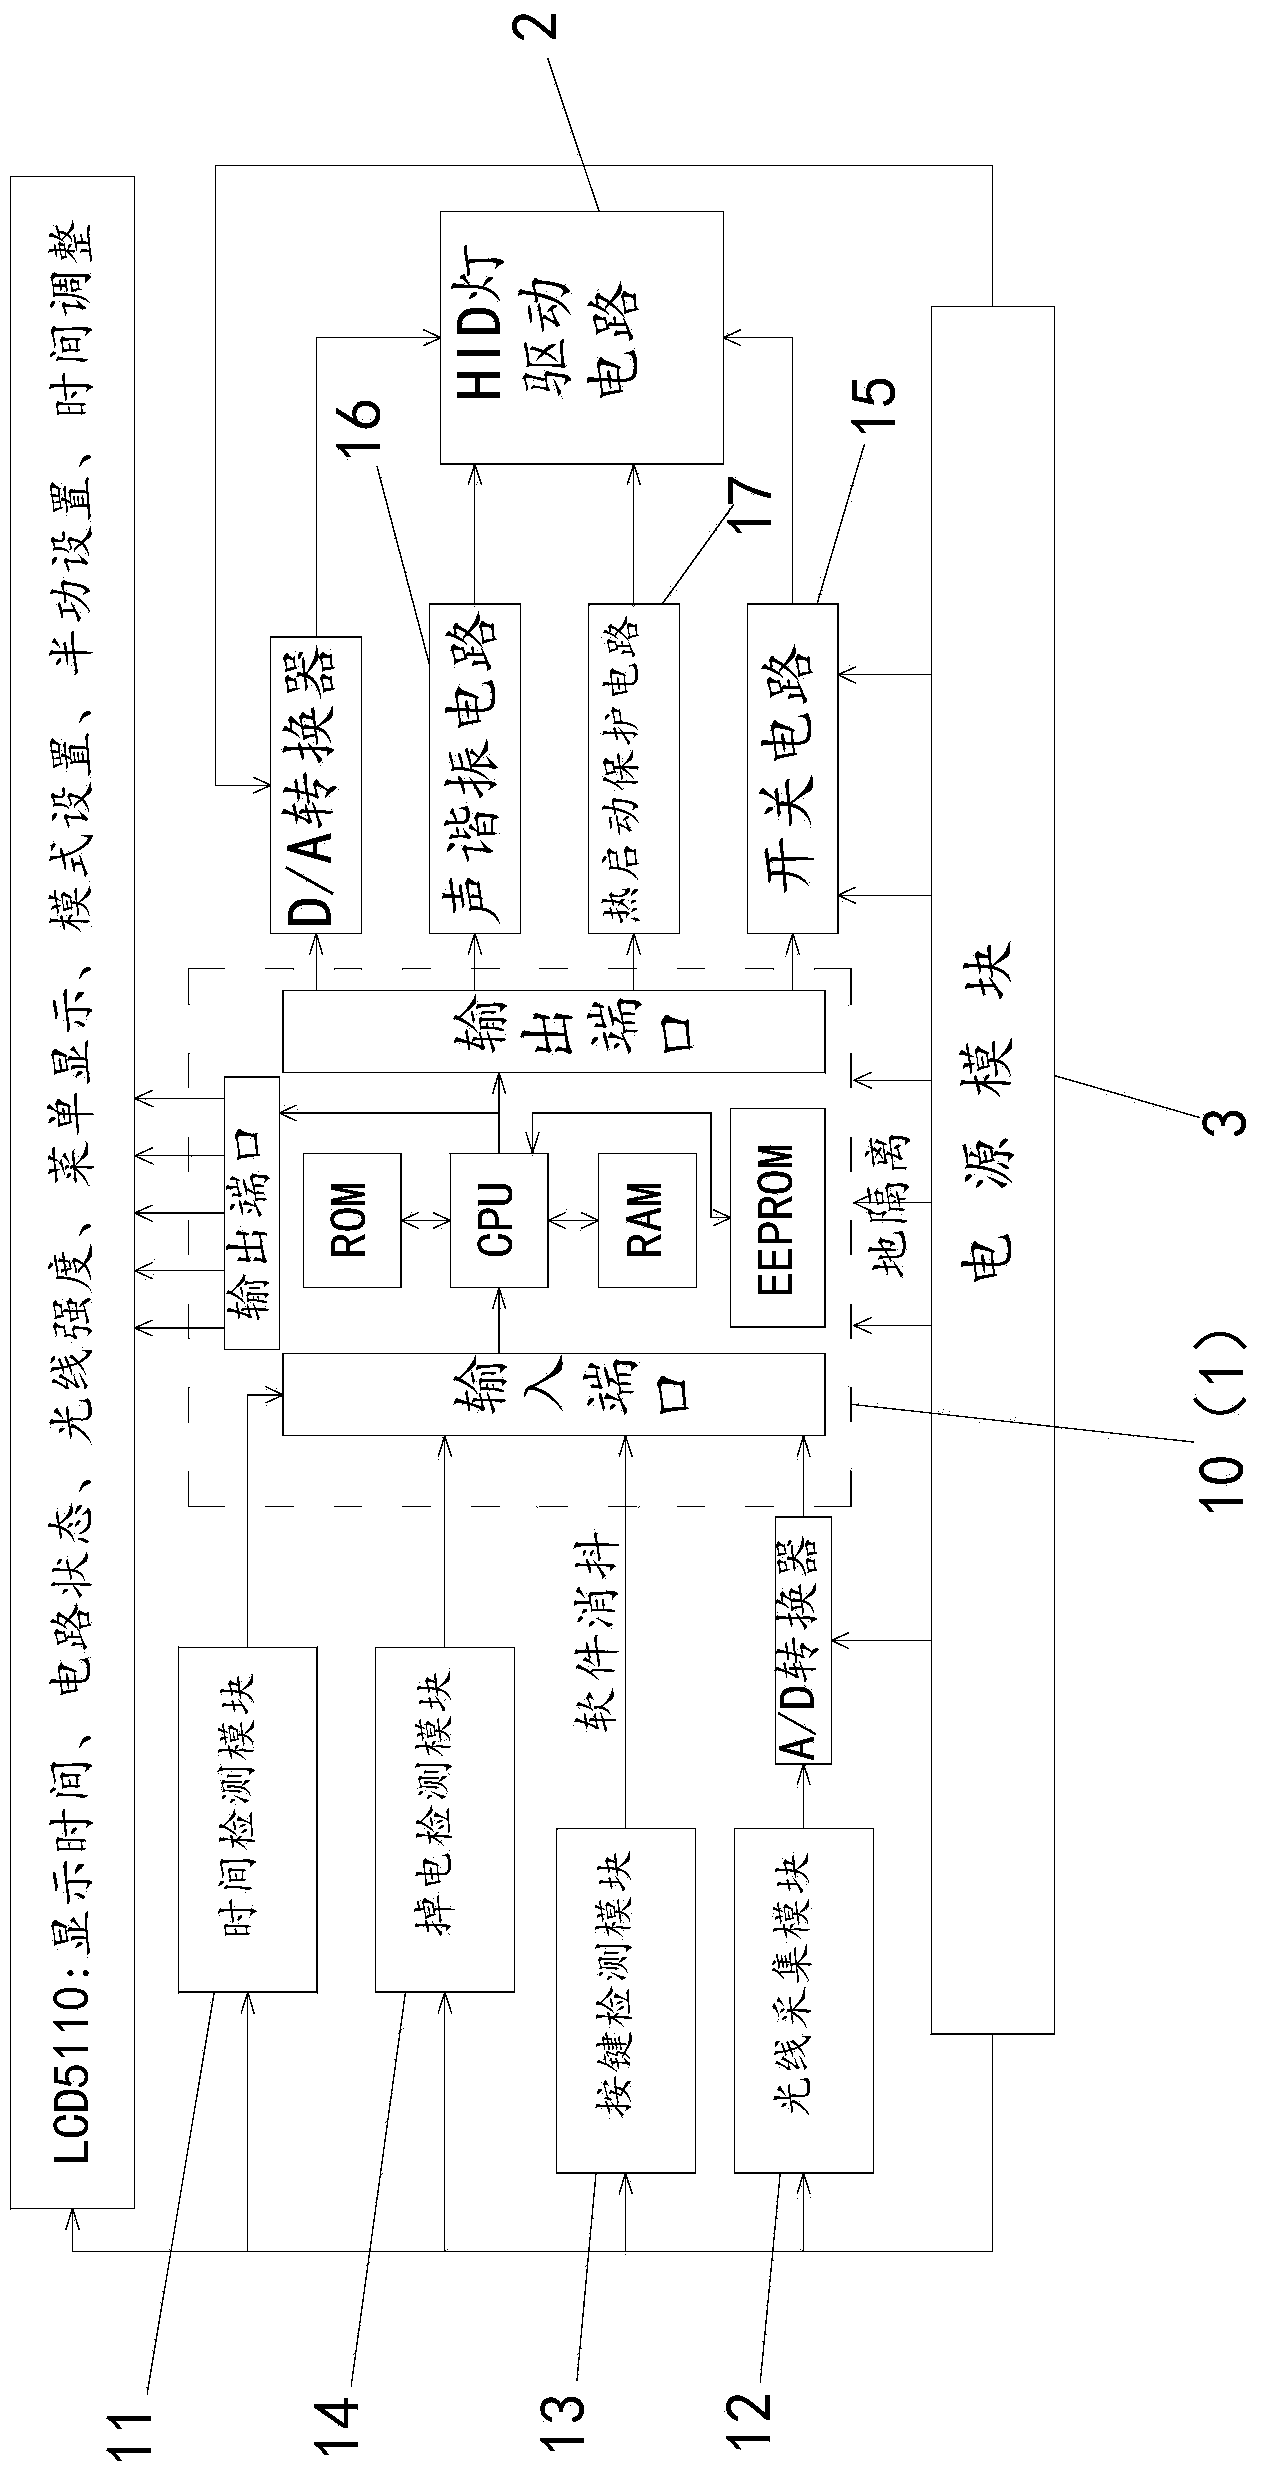 Digitization HID lamp driving system and method